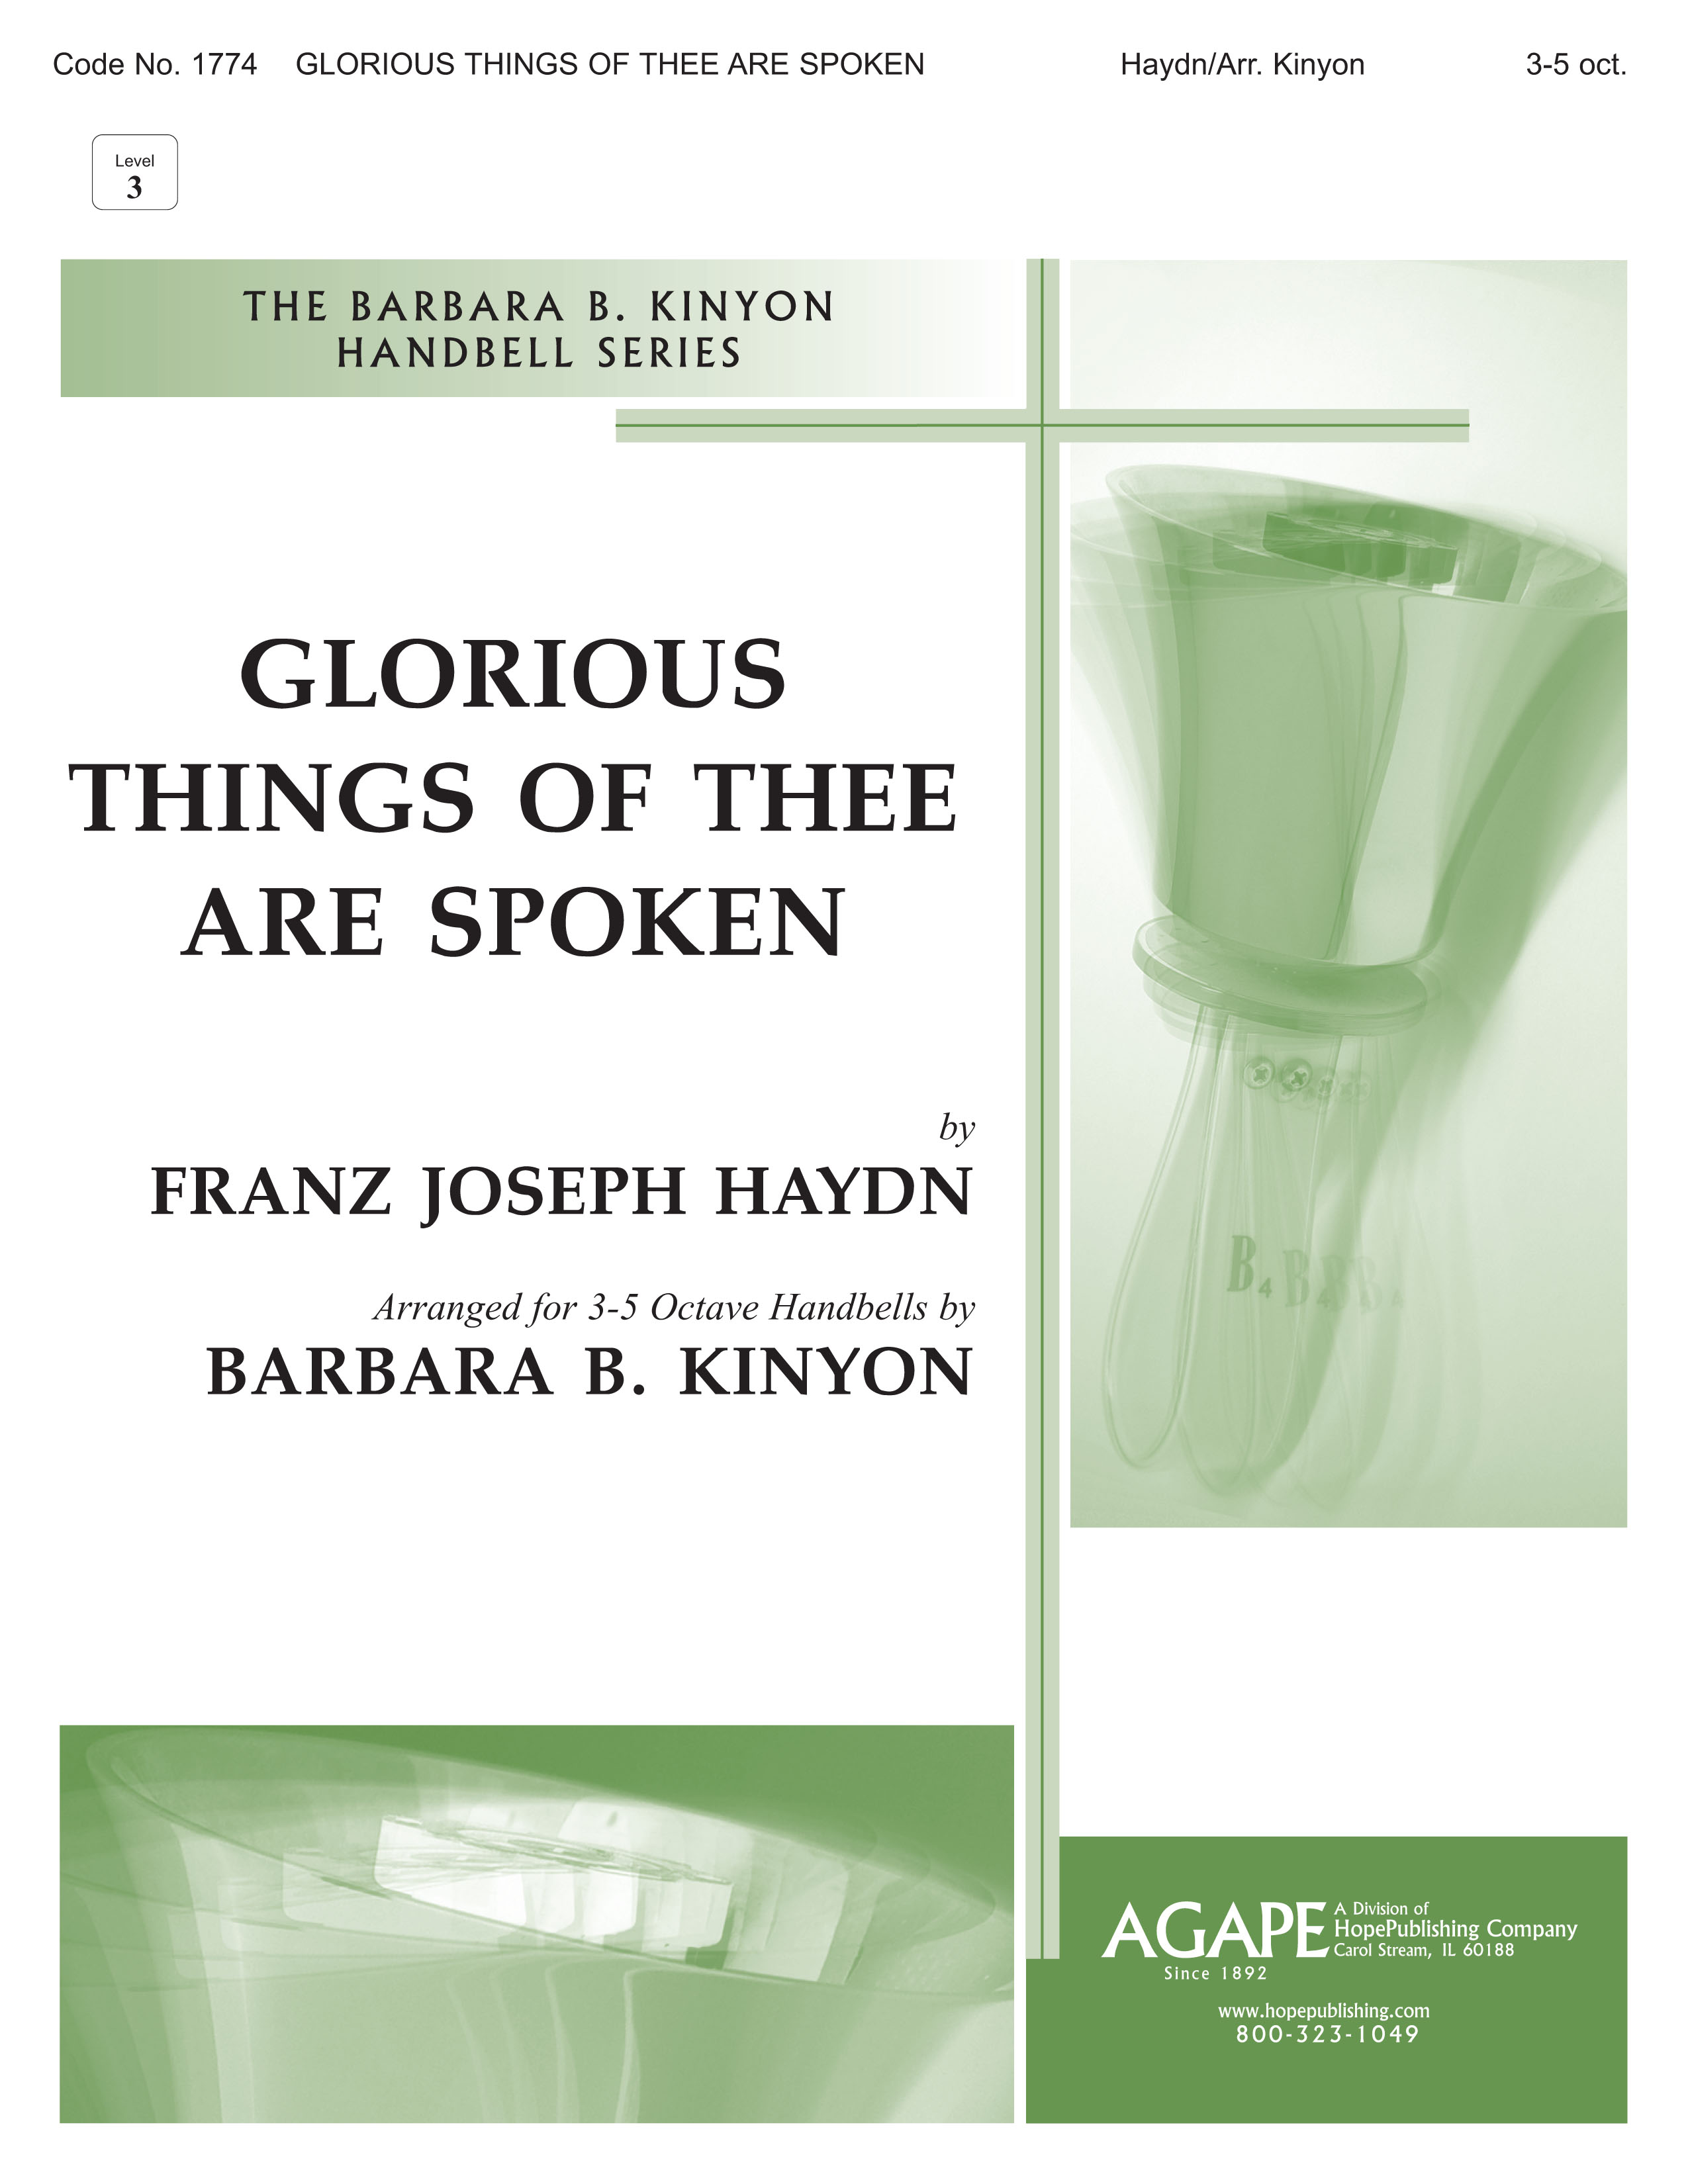 Glorious Things of Thee Are Spoken - 3-5 Oct. Cover Image